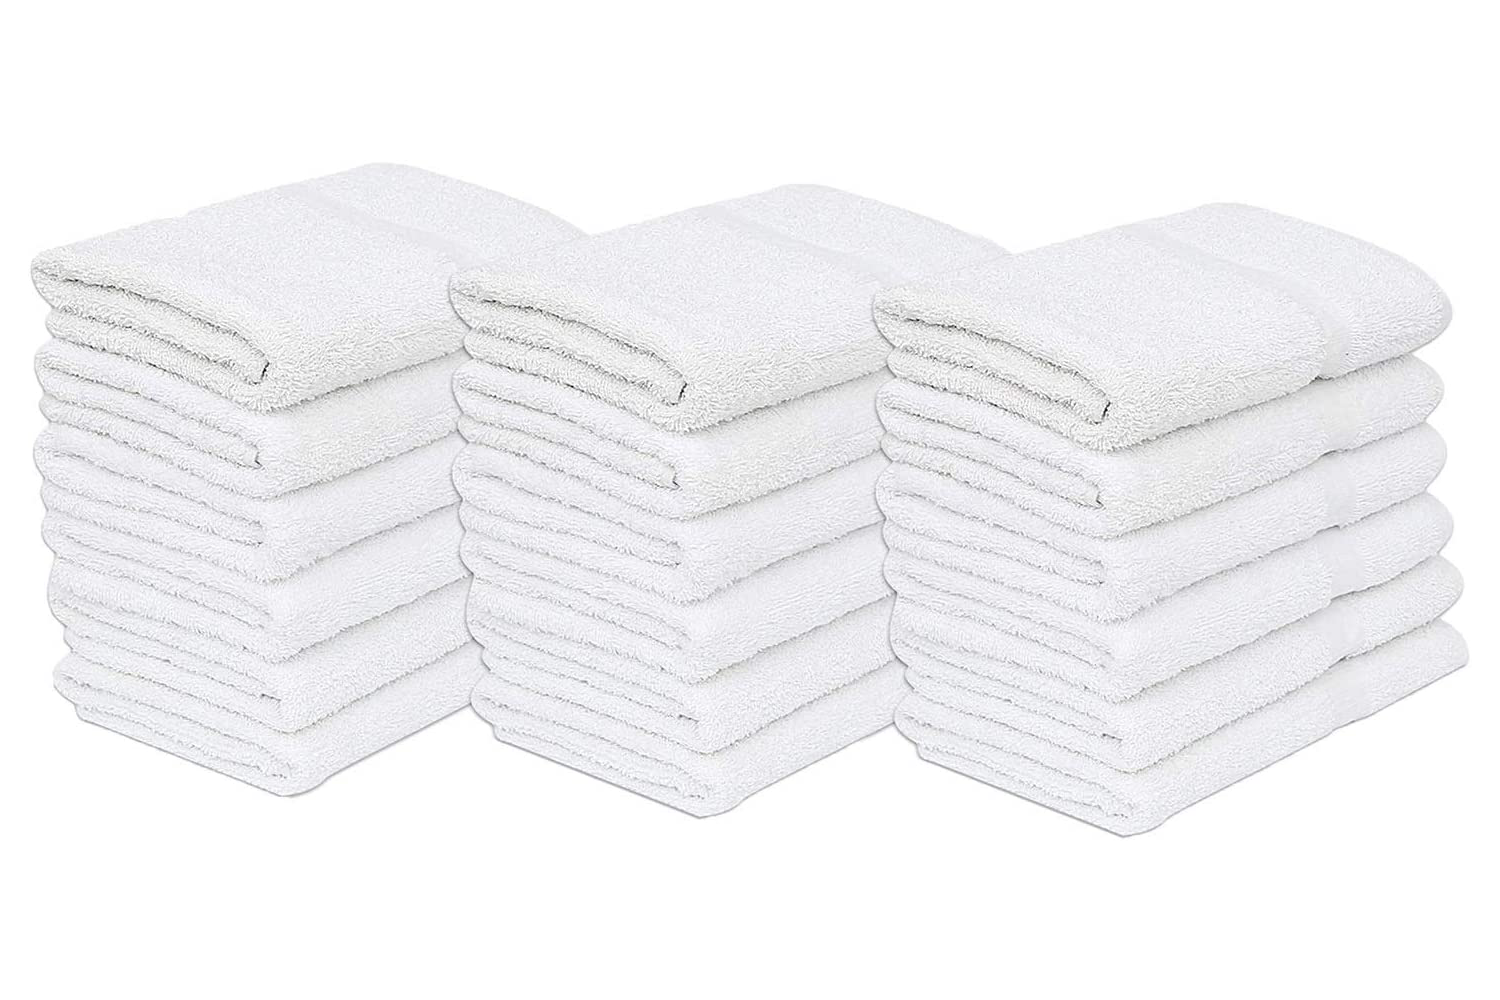 24 x 48 Economy Bath Towel (white, 60/case) from  -  Supplying quality towels at wholesale prices for over 30 years